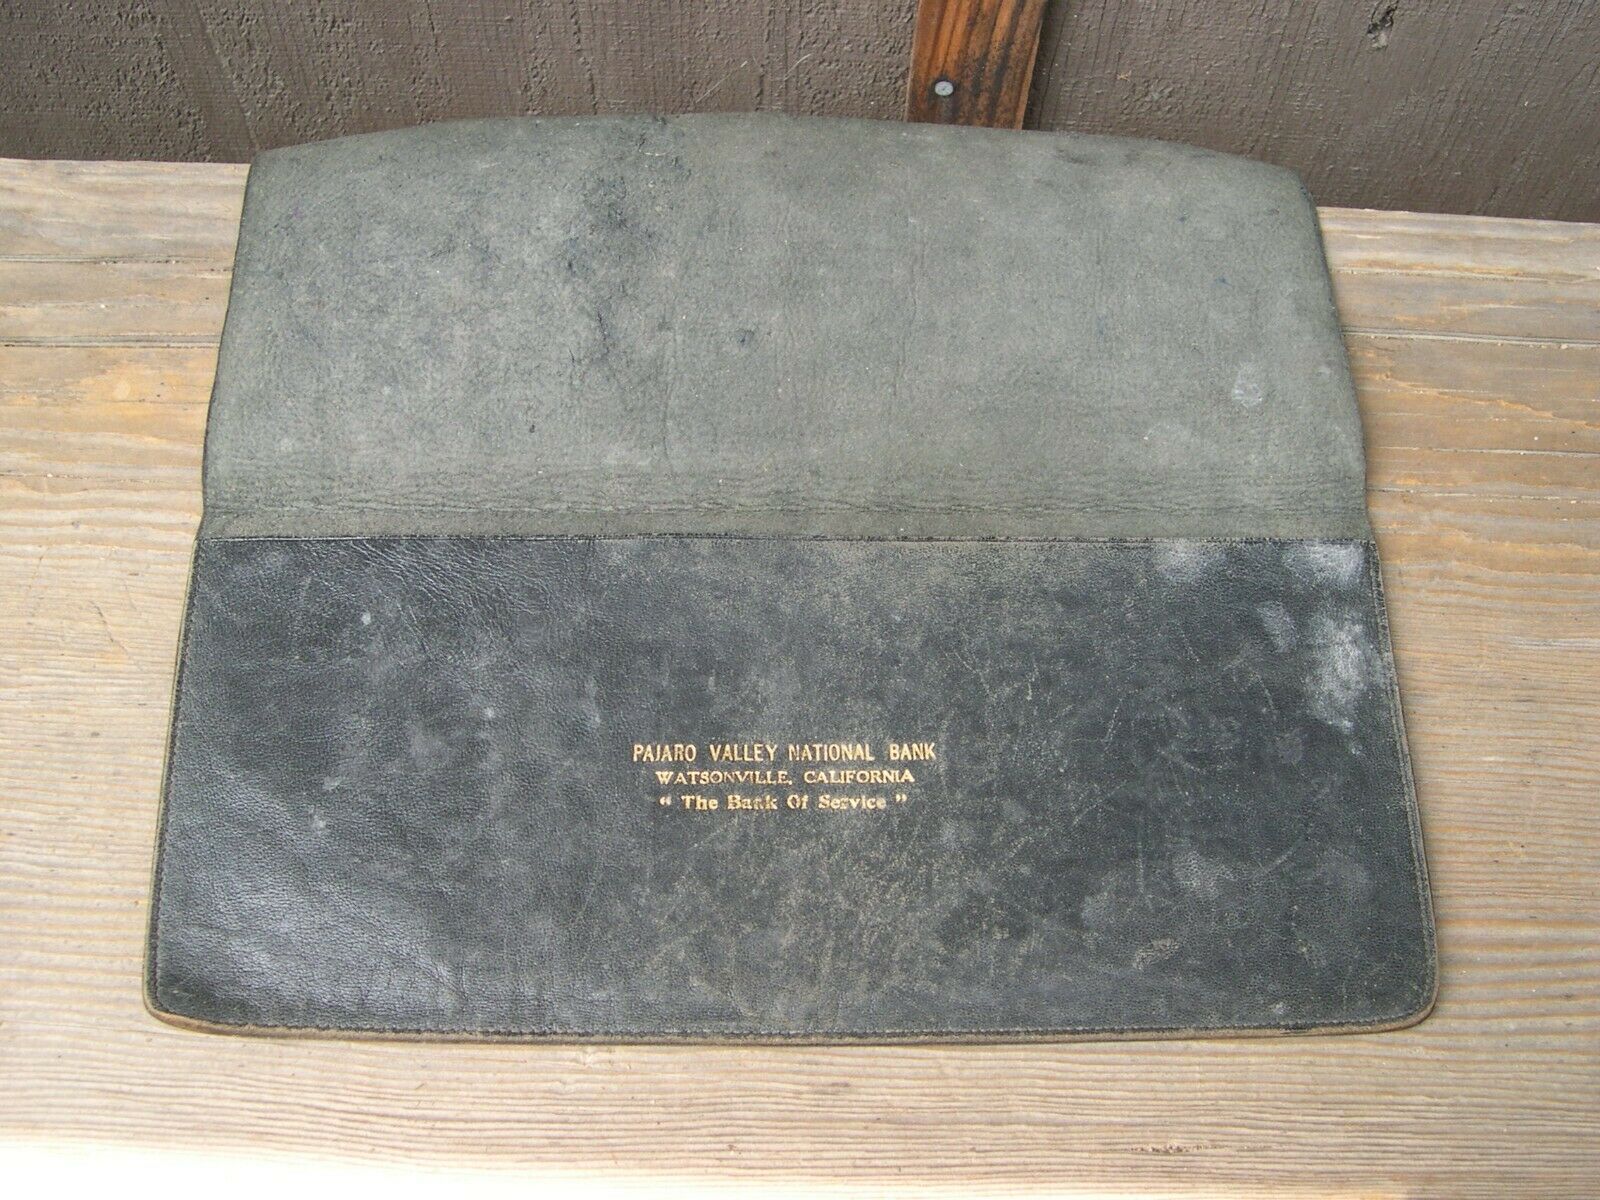 Pajaro Valley National Bank Watsonville, California leather document wallet